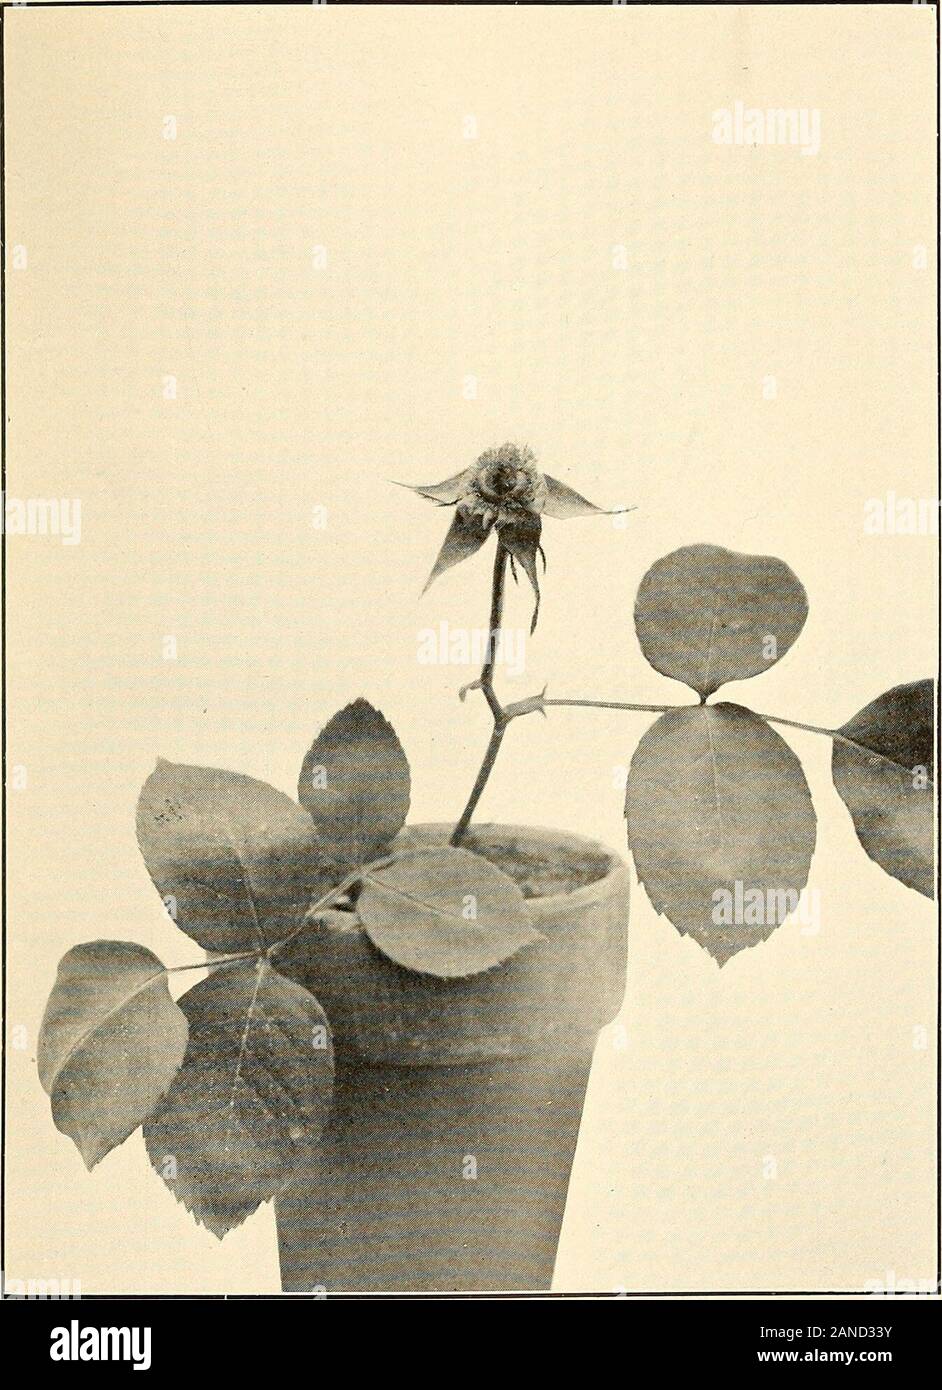 The practical book of outdoor rose growing for the home garden . Fig. fi .ROSE WITH PETALS REMOVED, SHOWING THE STAMENS AND ANTHERSWHICH BEAR THE POLLEN. Fig. 7 SAME ROSE AS FIG. 6 WITH MOST OF STAMENS AND ANTHERS REMOVED, SHOWING THE STYLES AND PISTILS—THE FEMALE ORGANS GENERAL INFORMATION the selected rose before the pollen reaches this stage.After the petals have been removed a small pair ofscissors should be used to cut off the anthers. Ourmethod has been to have a helper hold a piece ofpaper on which most of the stamens and the anthersand their pollen will be caught, and as we cut themoff Stock Photo